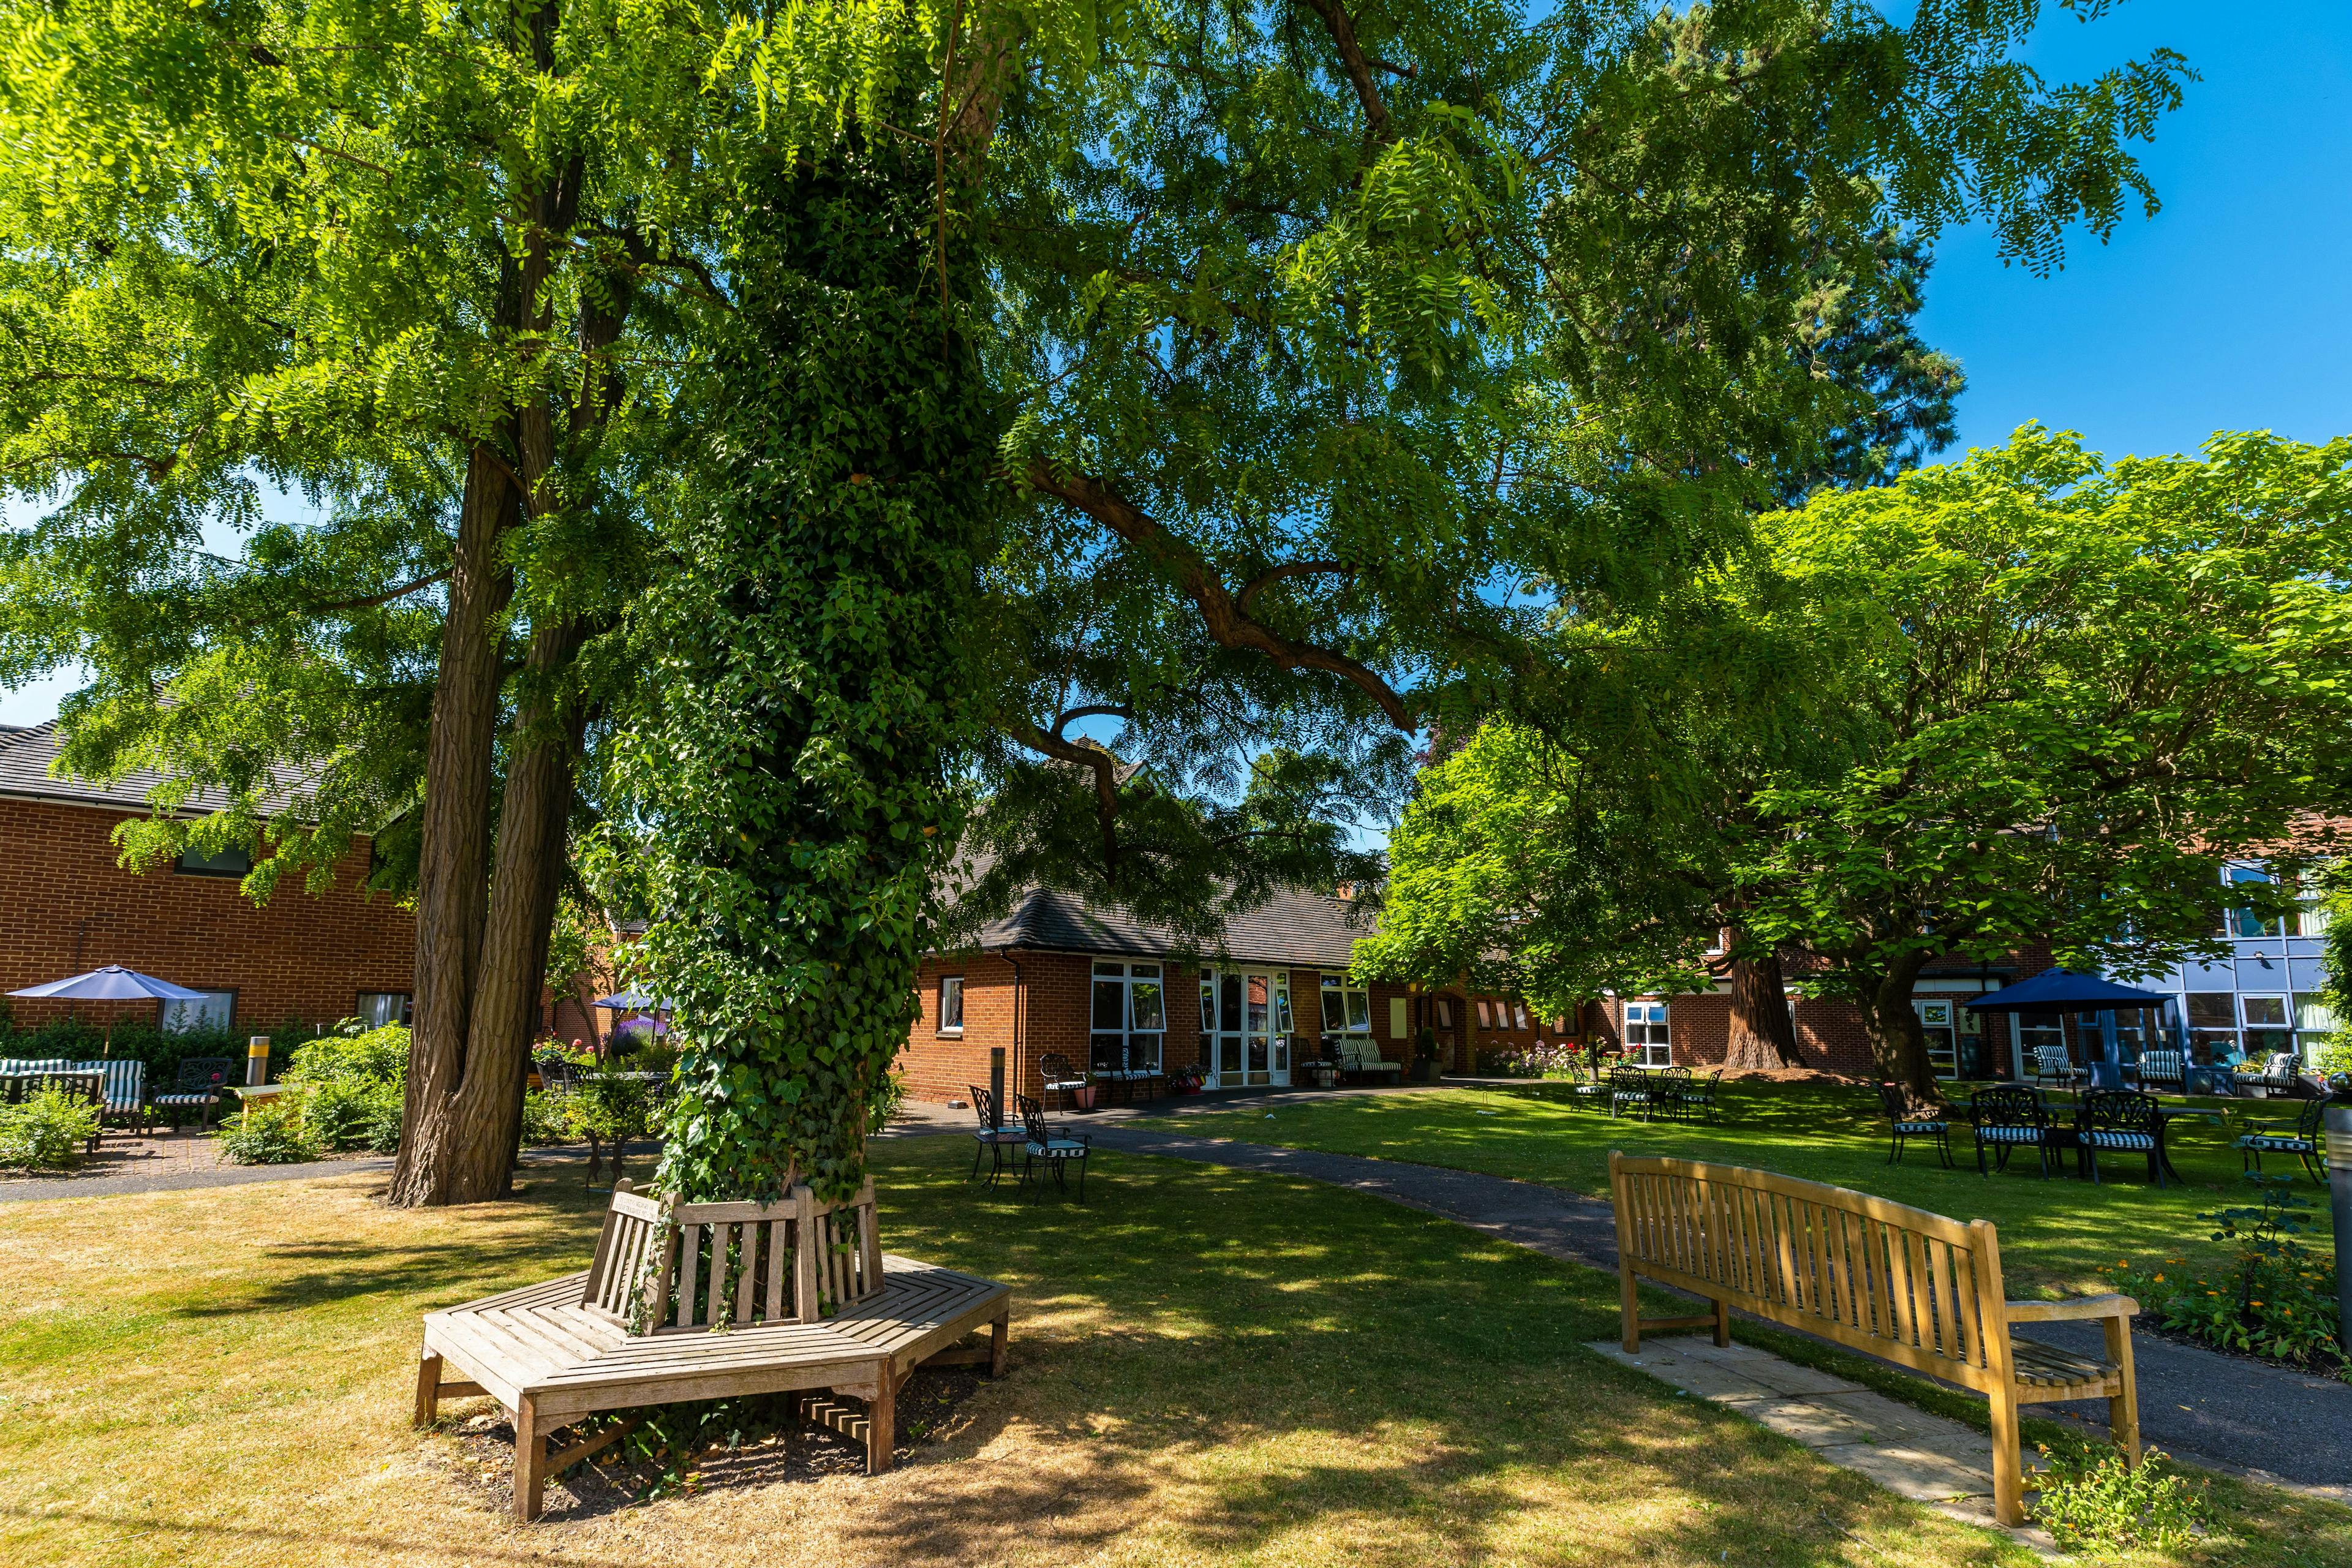 The Whitgift Foundation - Whitgift House care home 6